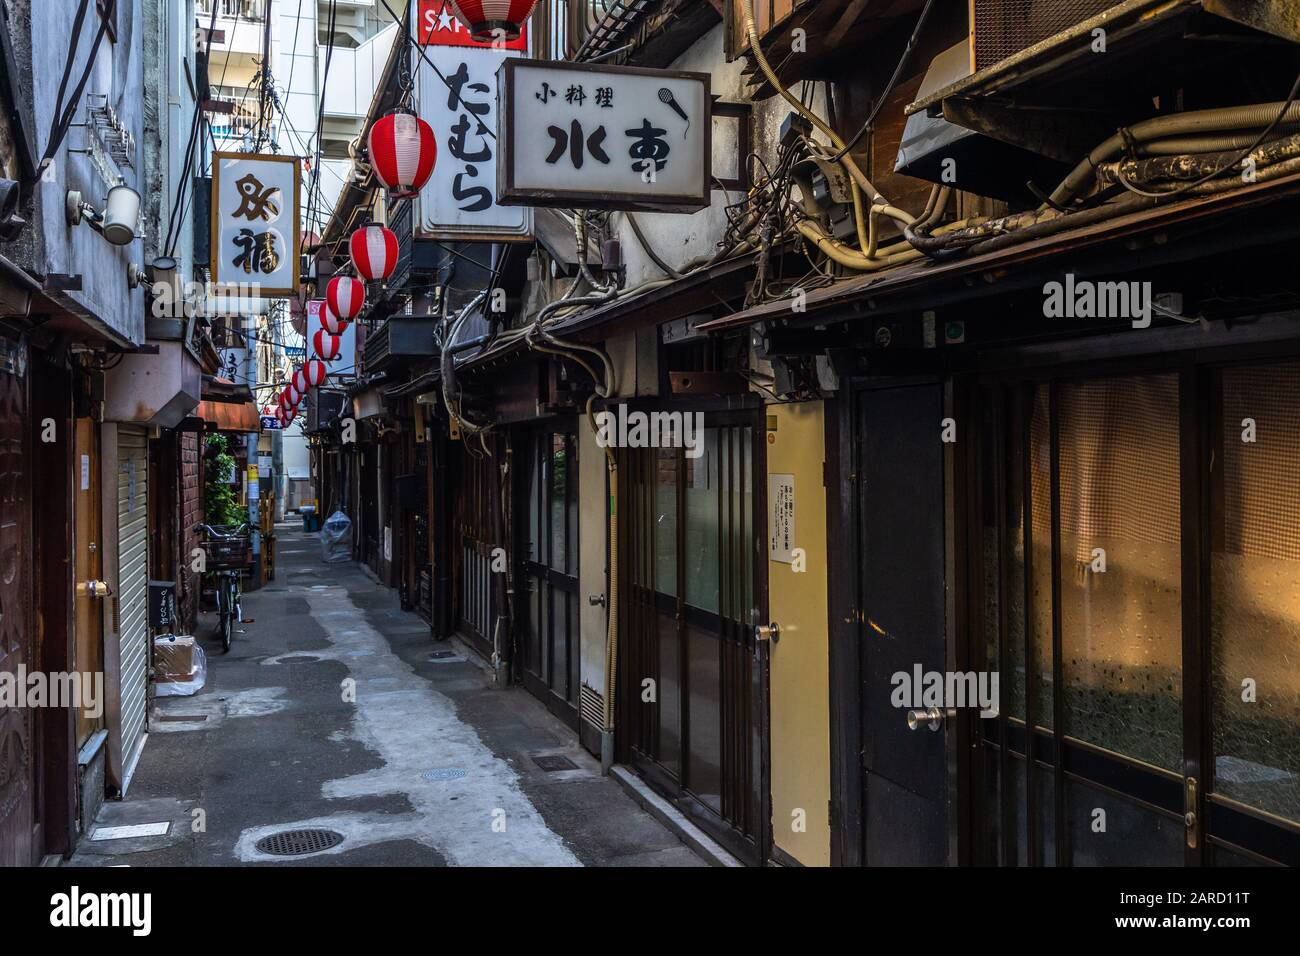 Tokyo, Japan, August 2019 - Nombei yokocho is a famous alley in Shibuya full of bars and restaurants Stock Photo